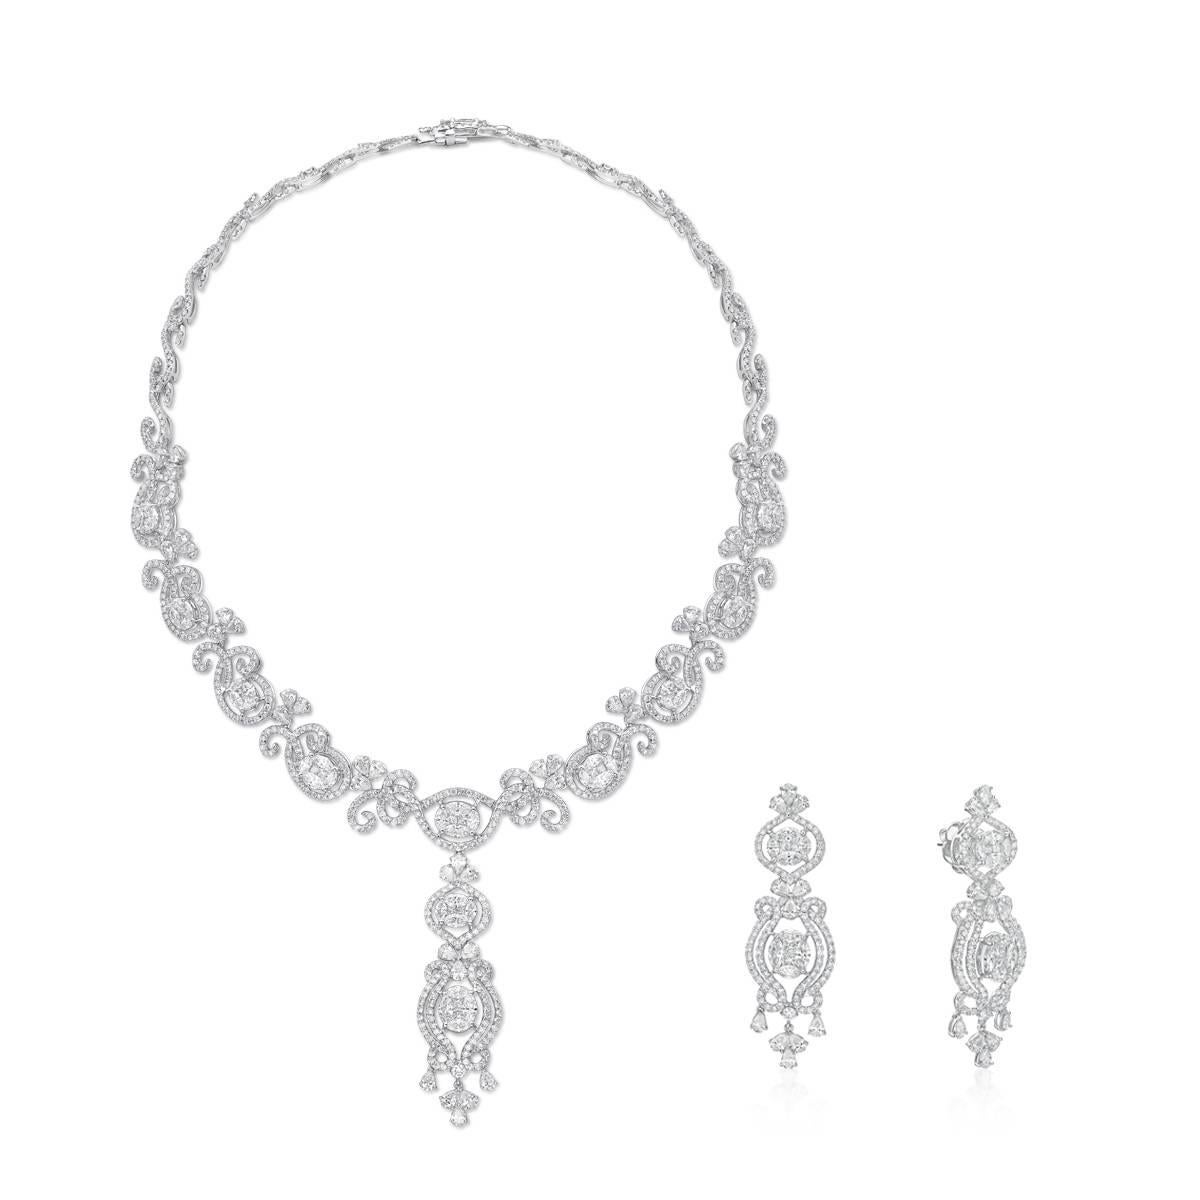 This gorgeous pair of earrings is ideal for special occasions or formal parties.

Diamond details:
242 Diamonds - 7.52 carat
18K White Gold

*Matching necklace is to be sold separately.